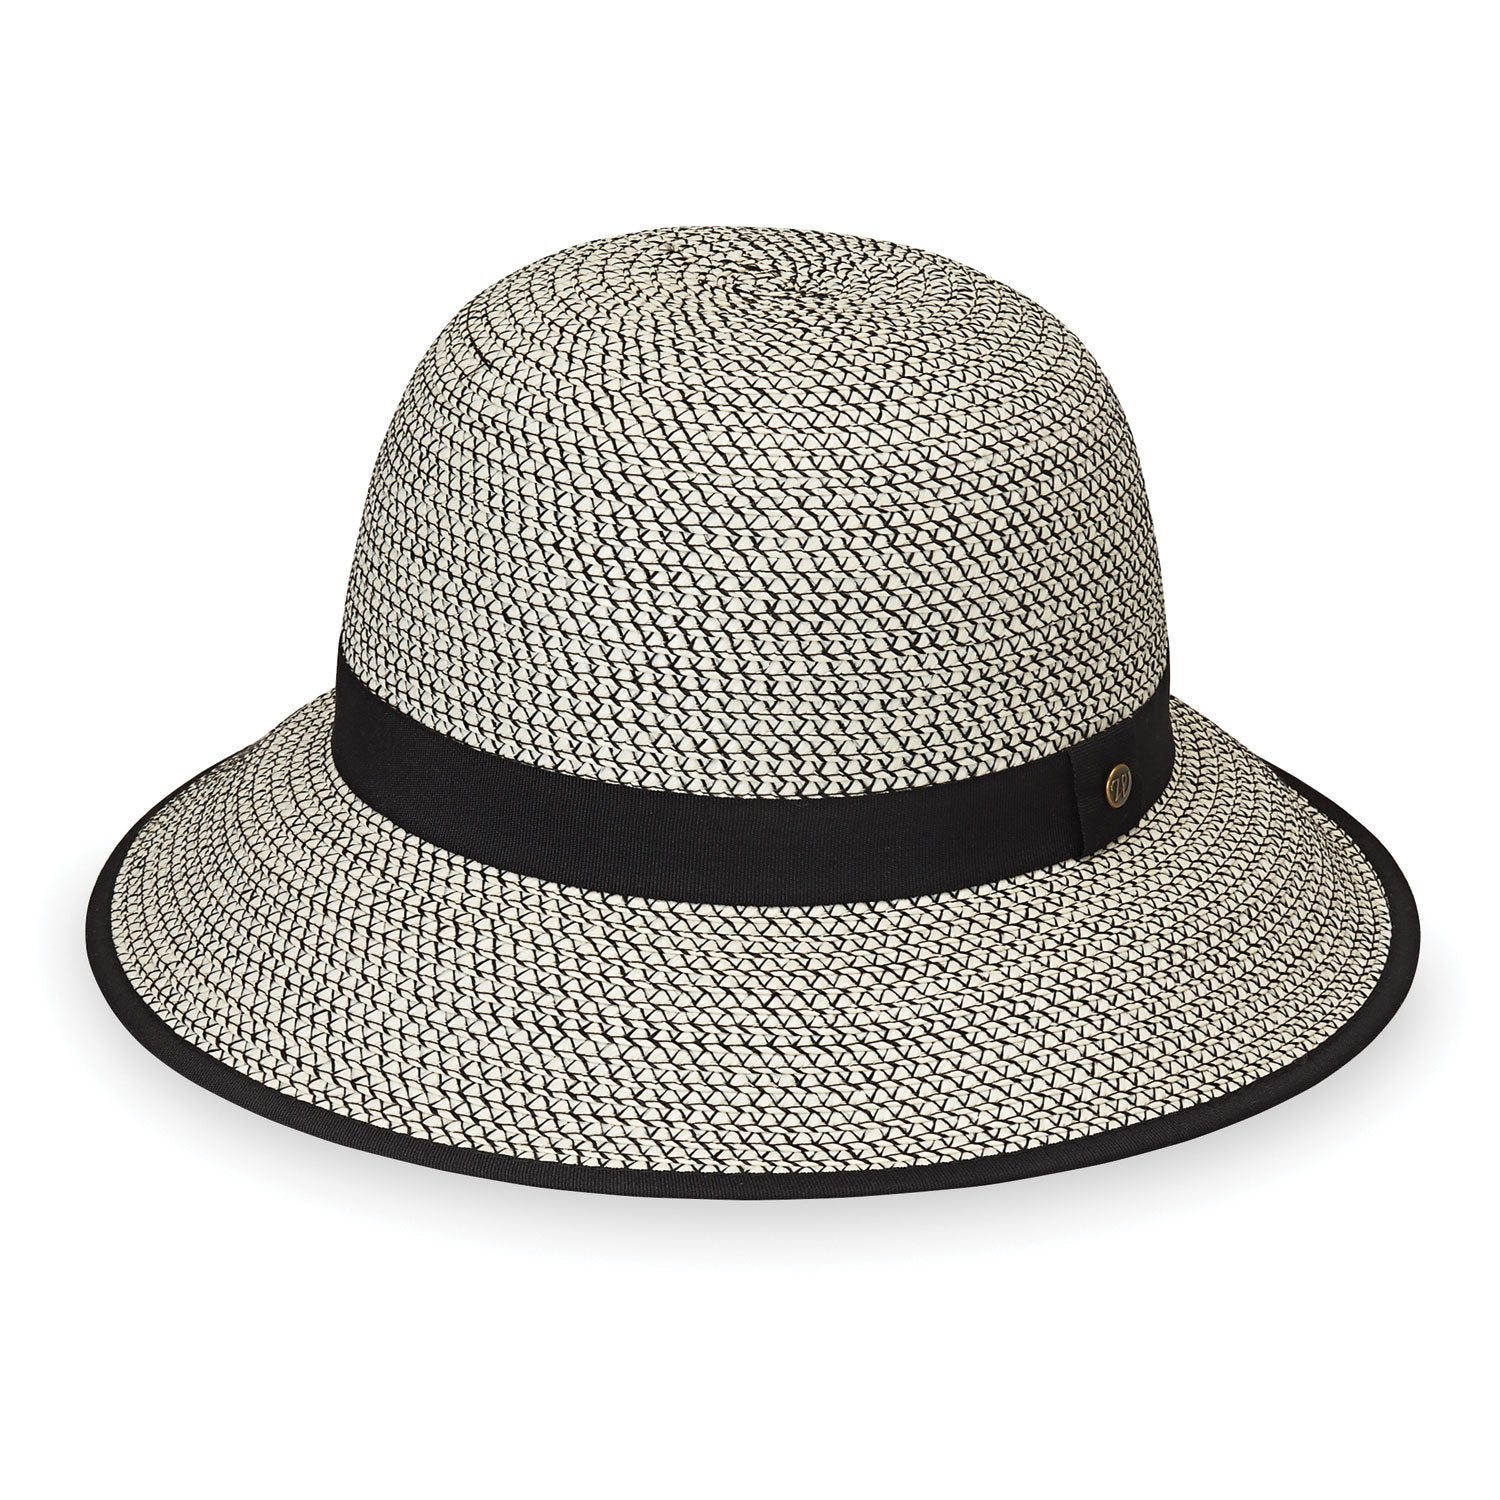 Featuring Front of UPF Darby Wide Brim Crown Style Sun Protection Hat in Ivory Black from Wallaroo